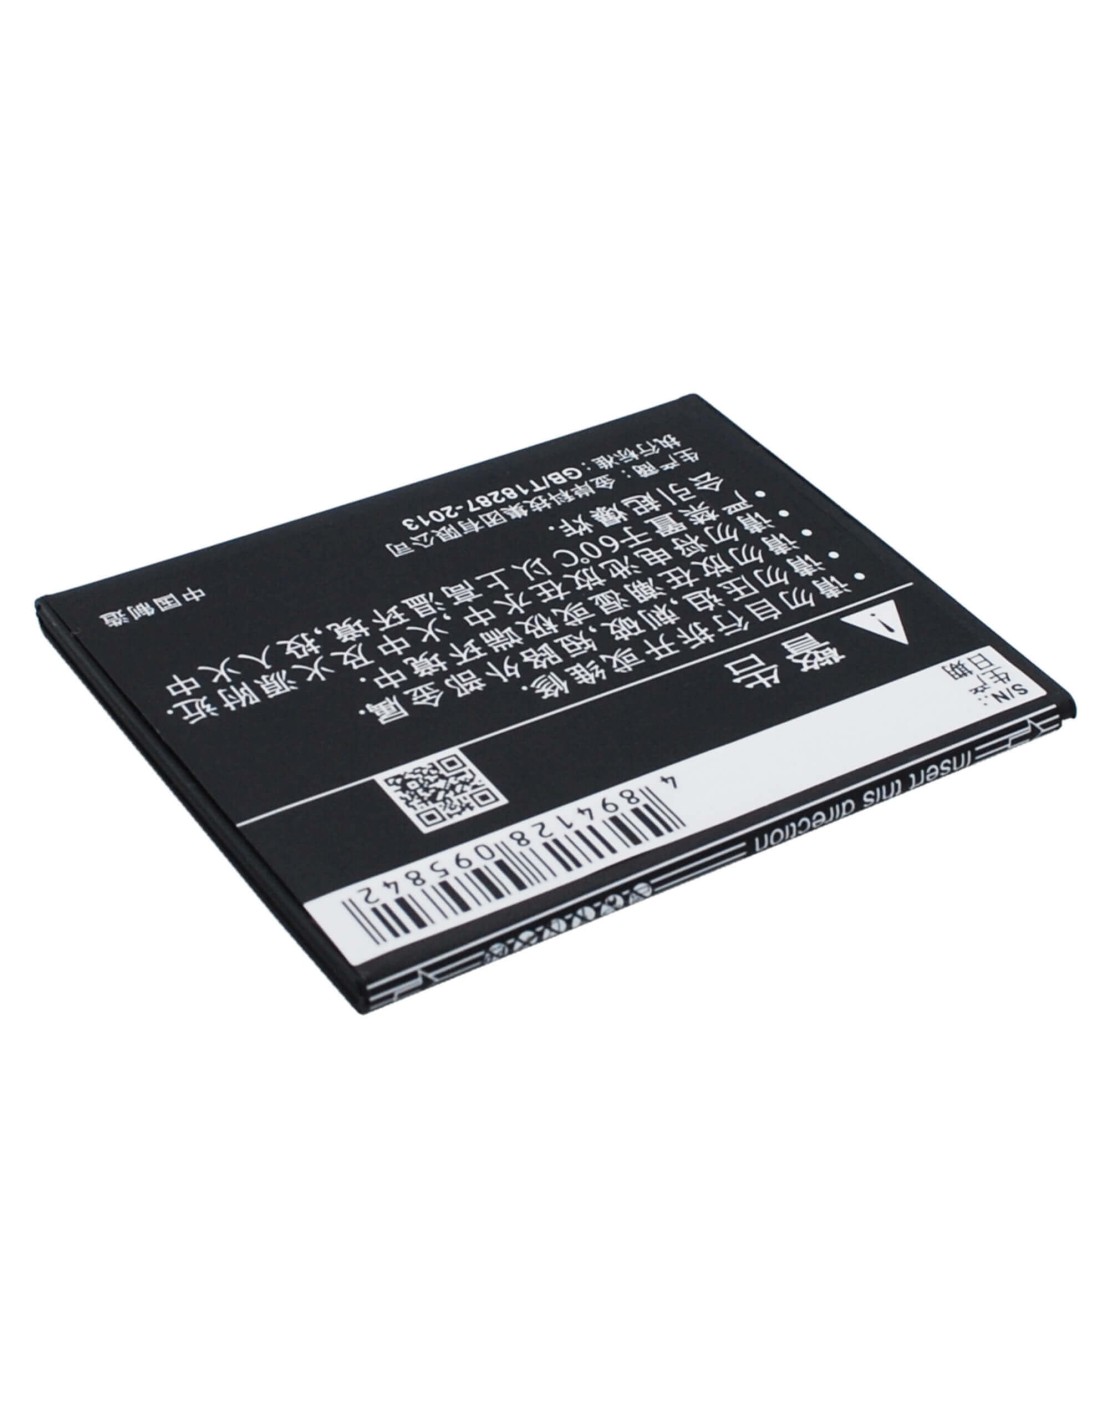 Battery for Coolpad 5910, 5950, 8750 3.7V, 2100mAh - 7.77Wh